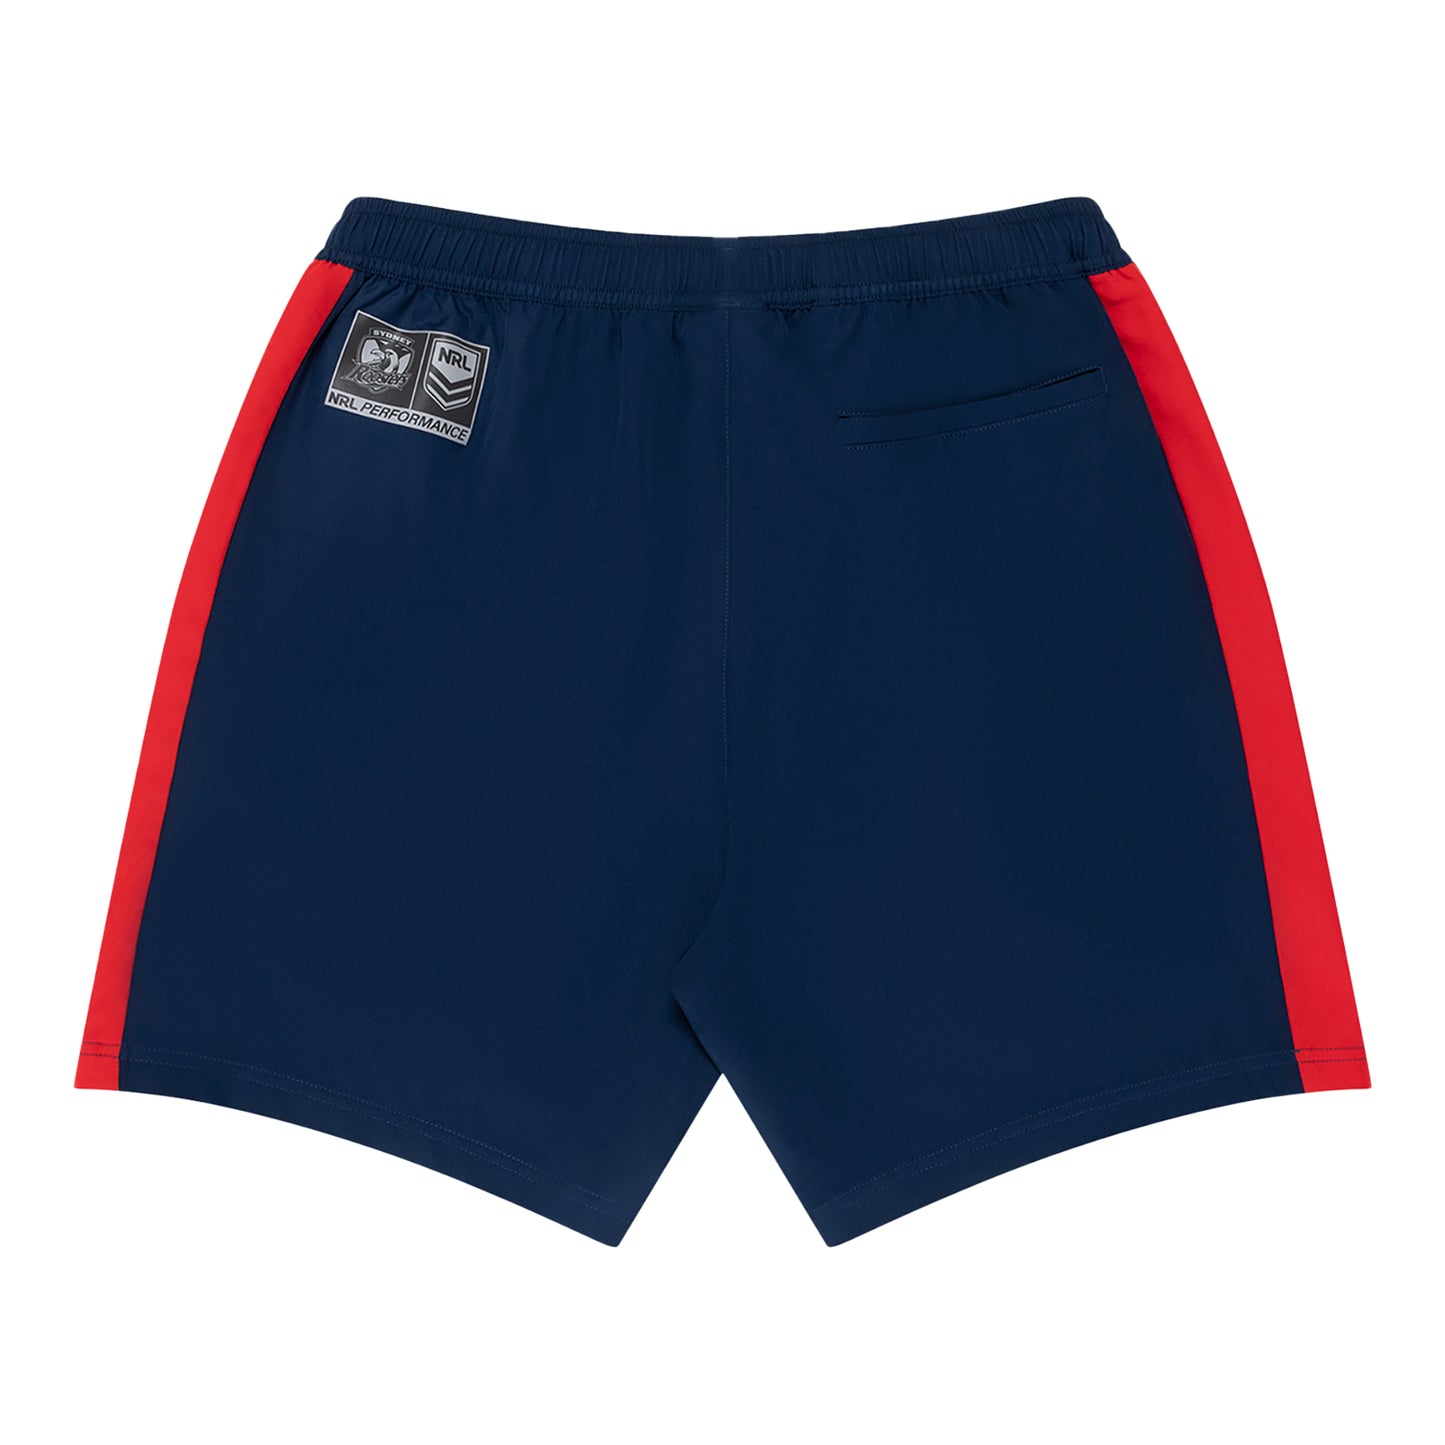 Sydney Roosters Mens Performance Shorts